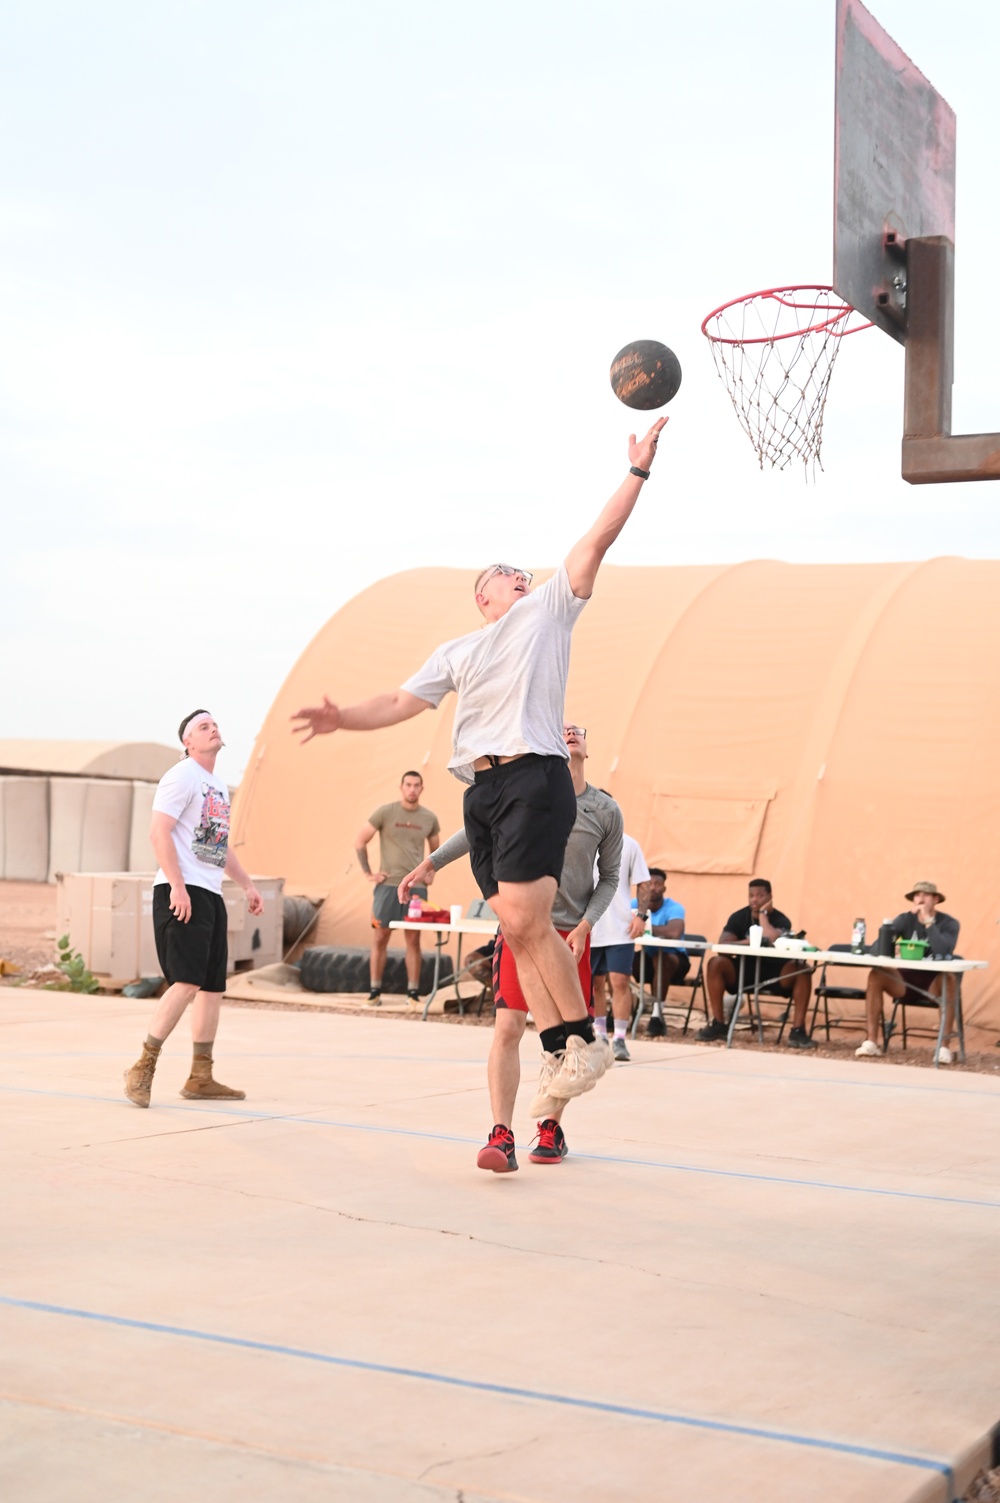 Air Base 201 4th of July celebration: Basketball Tournament